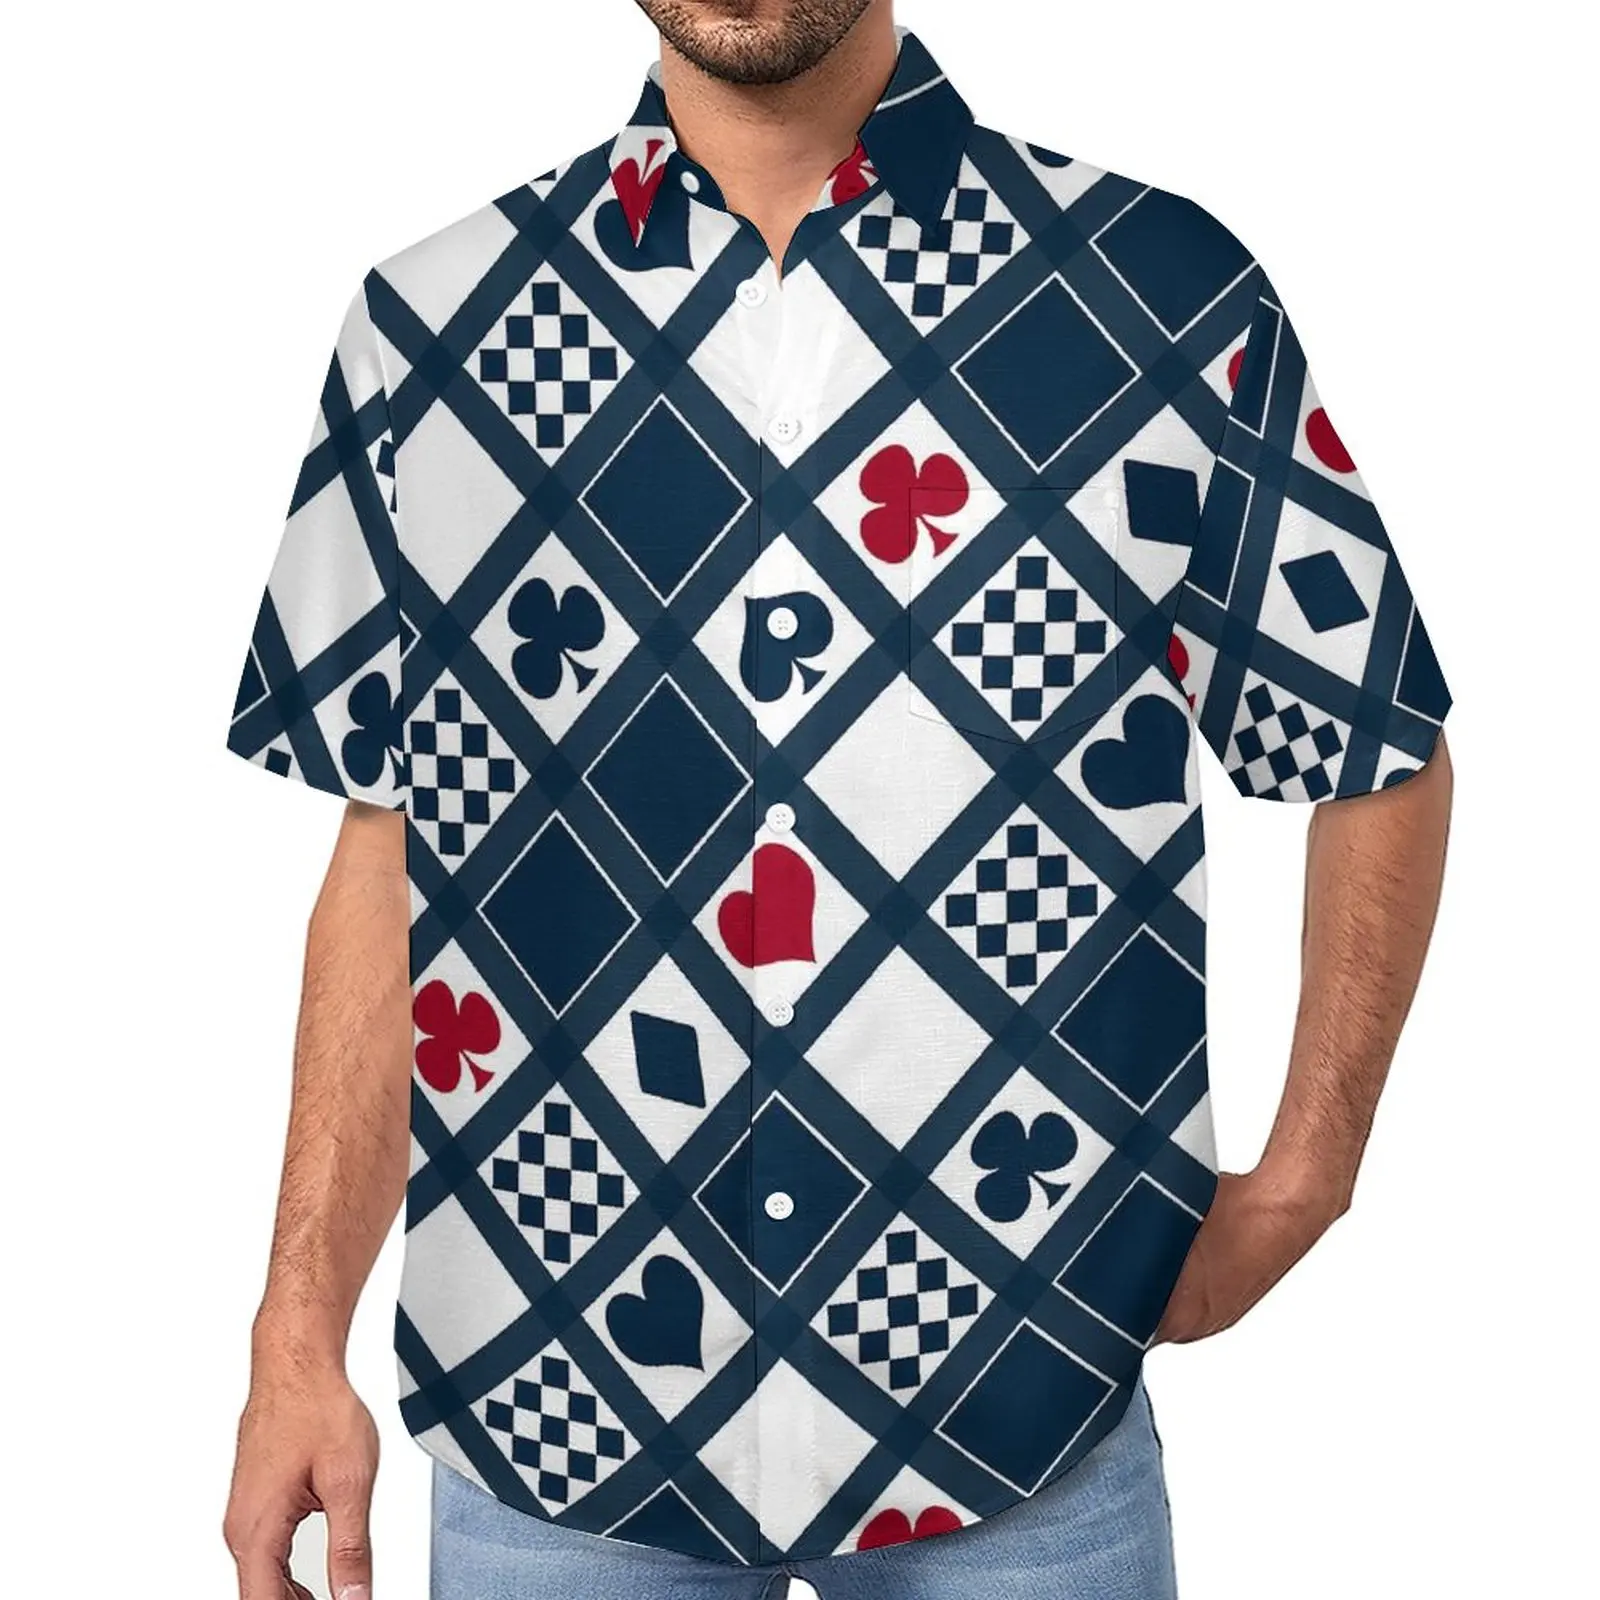 

Playing Cards Vacation Shirt Hearts Crosses Clubs Hawaii Casual Shirts Men Fashion Blouses Short-Sleeve Graphic Clothes Big Size